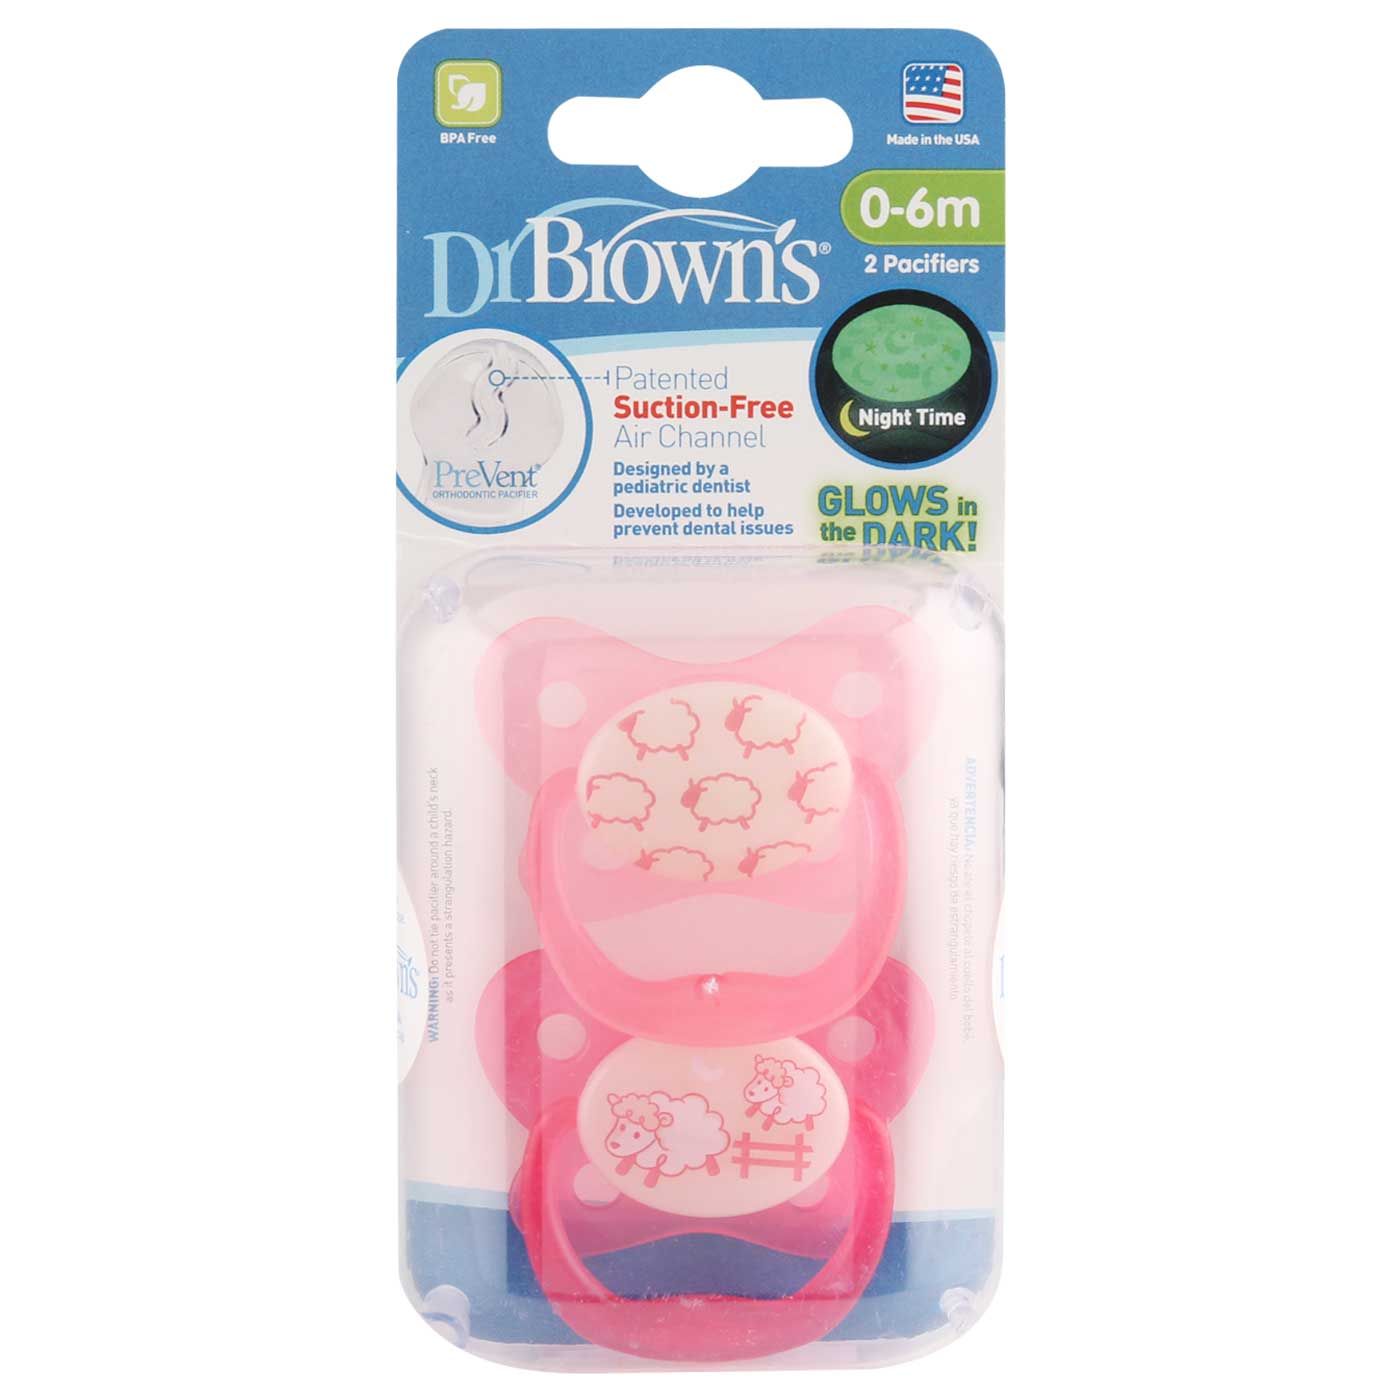 Dr.Brown's PreVent Glow in the dark Sheep (0-6m) Pink - 1